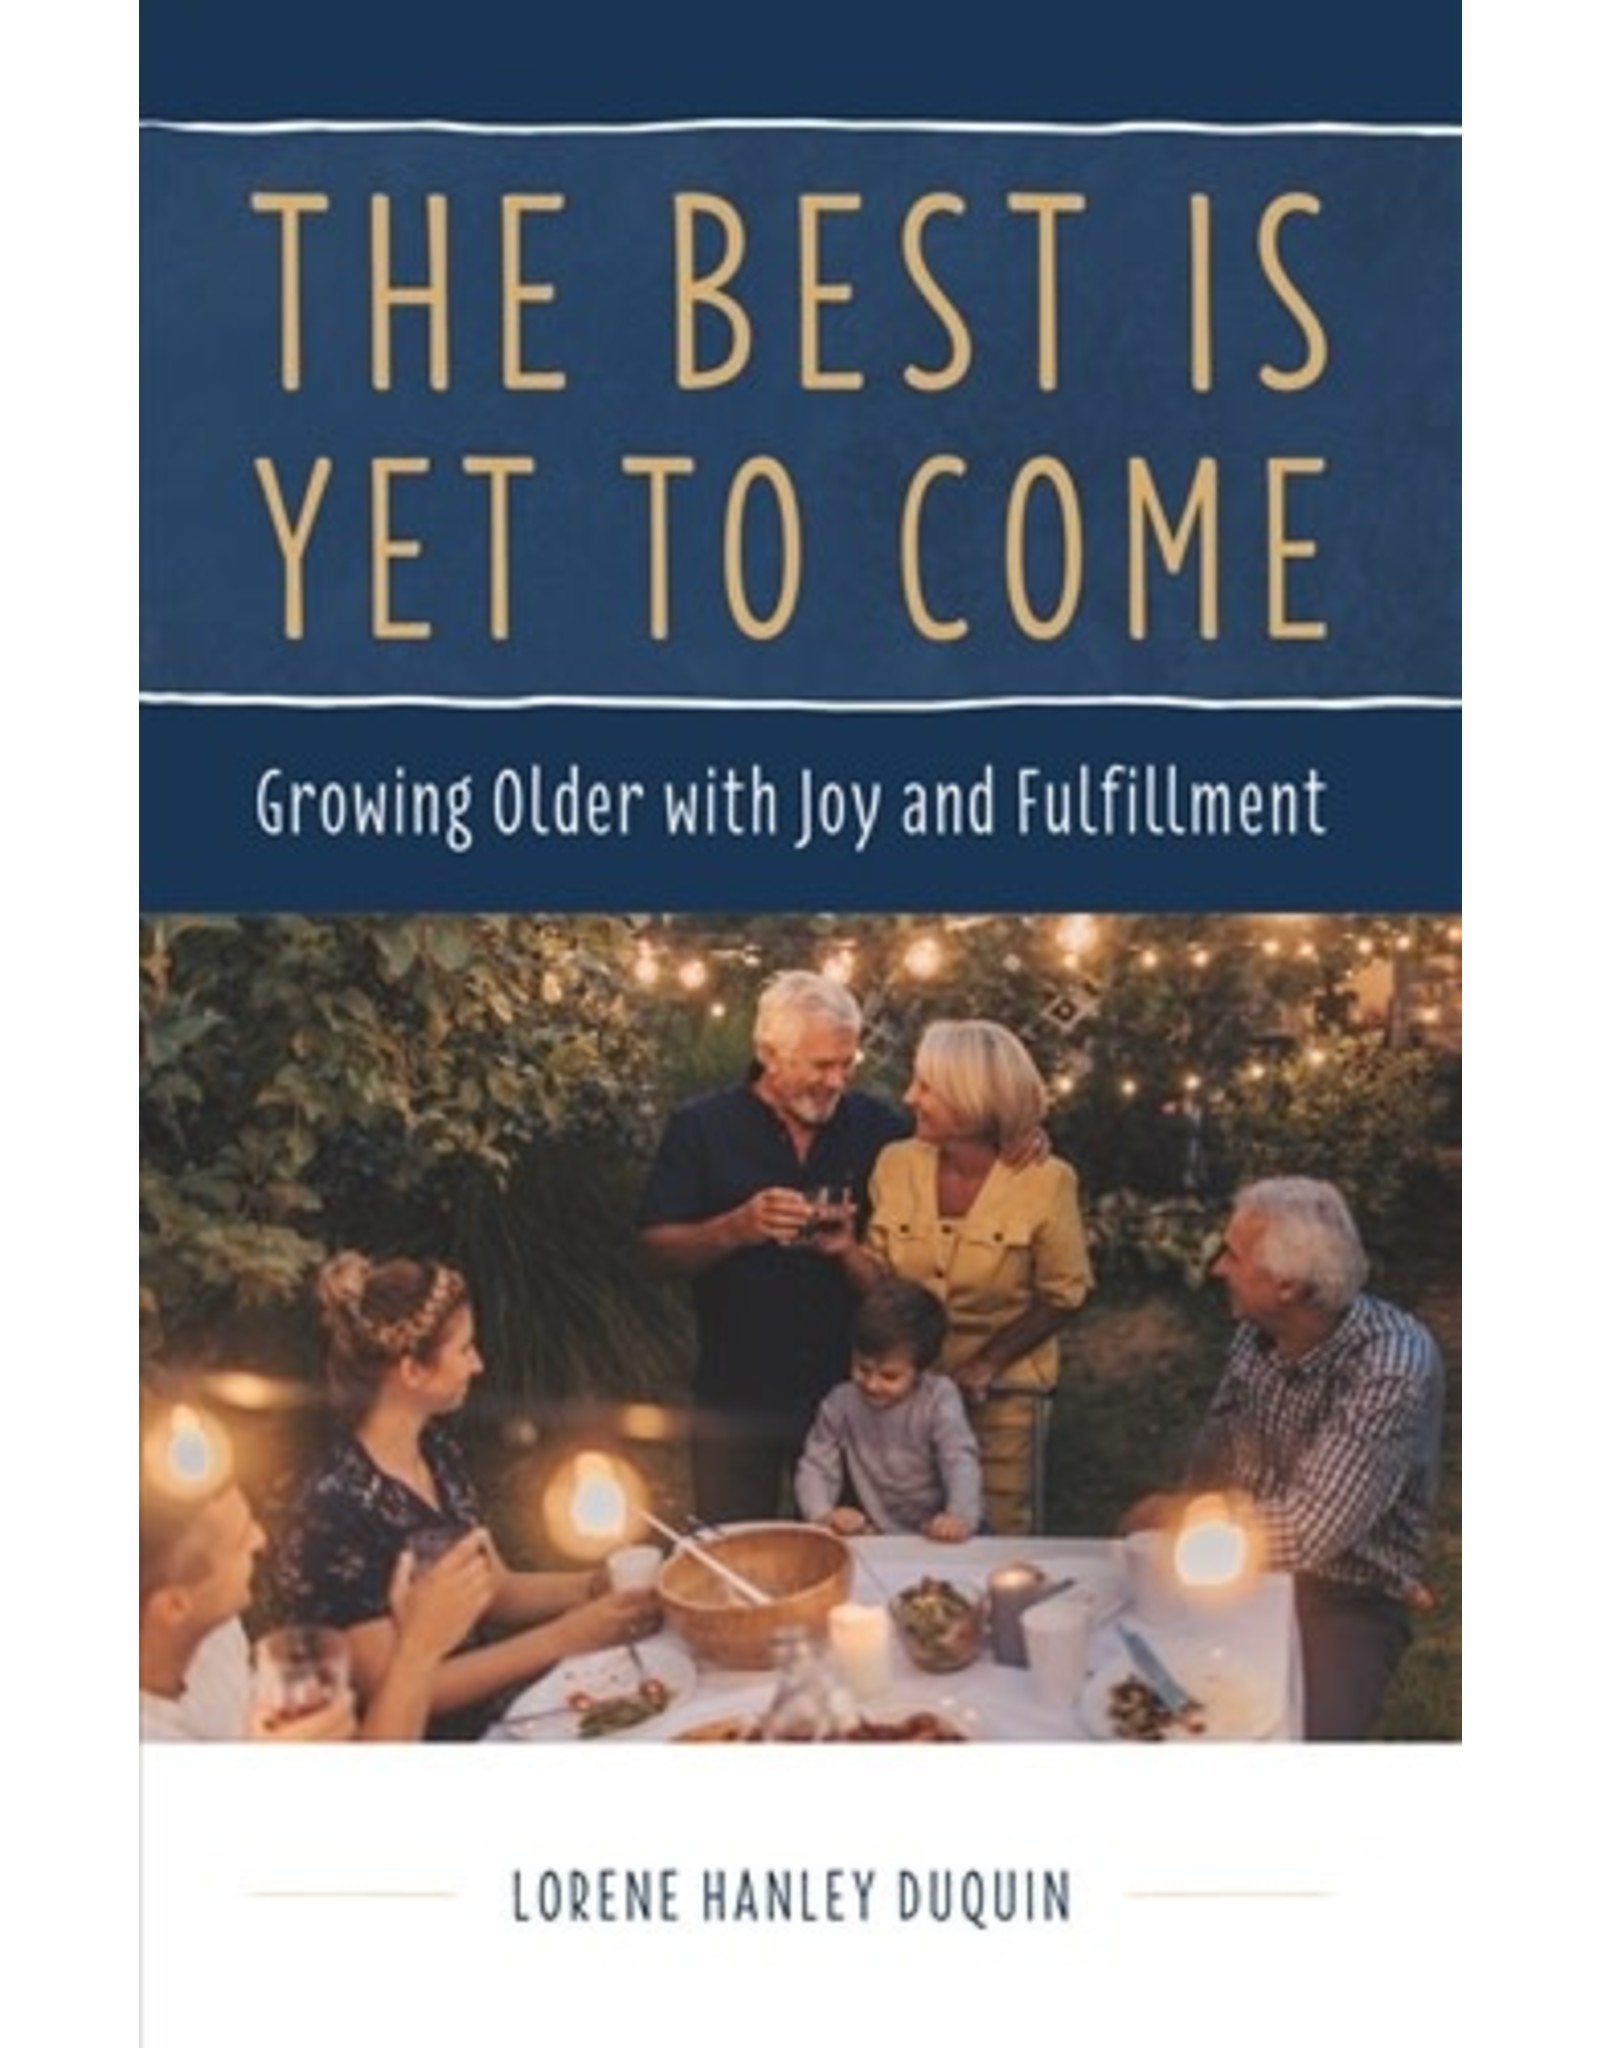 The Best Is Yet To Come: Growing Older with Joy & Fulfillment